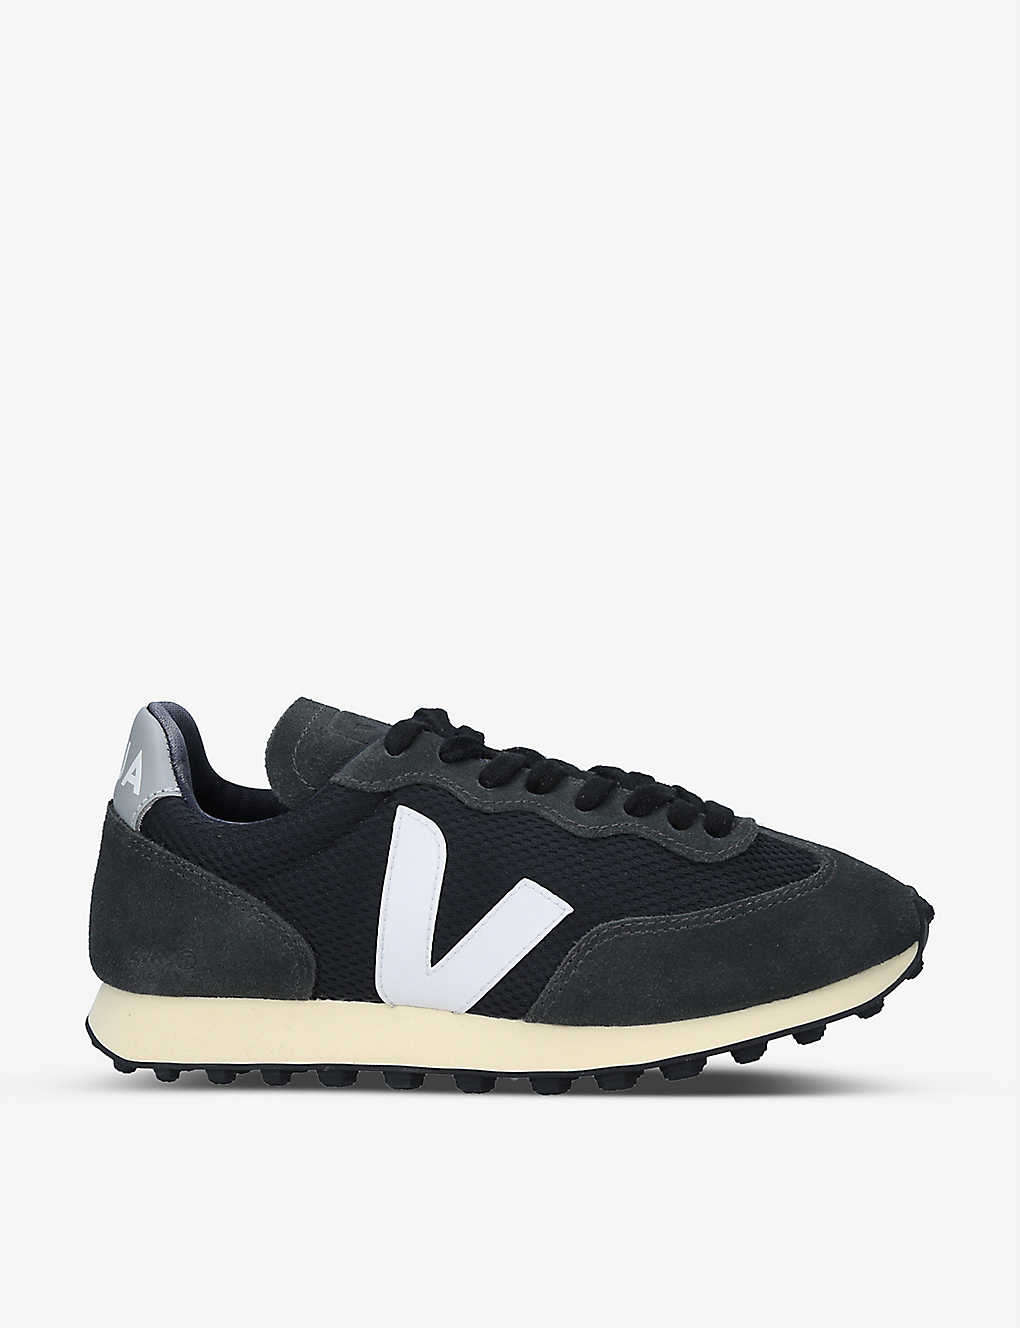 Shop Veja Women's Blk/other Women's Rio Branco Mesh And Leather Trainers